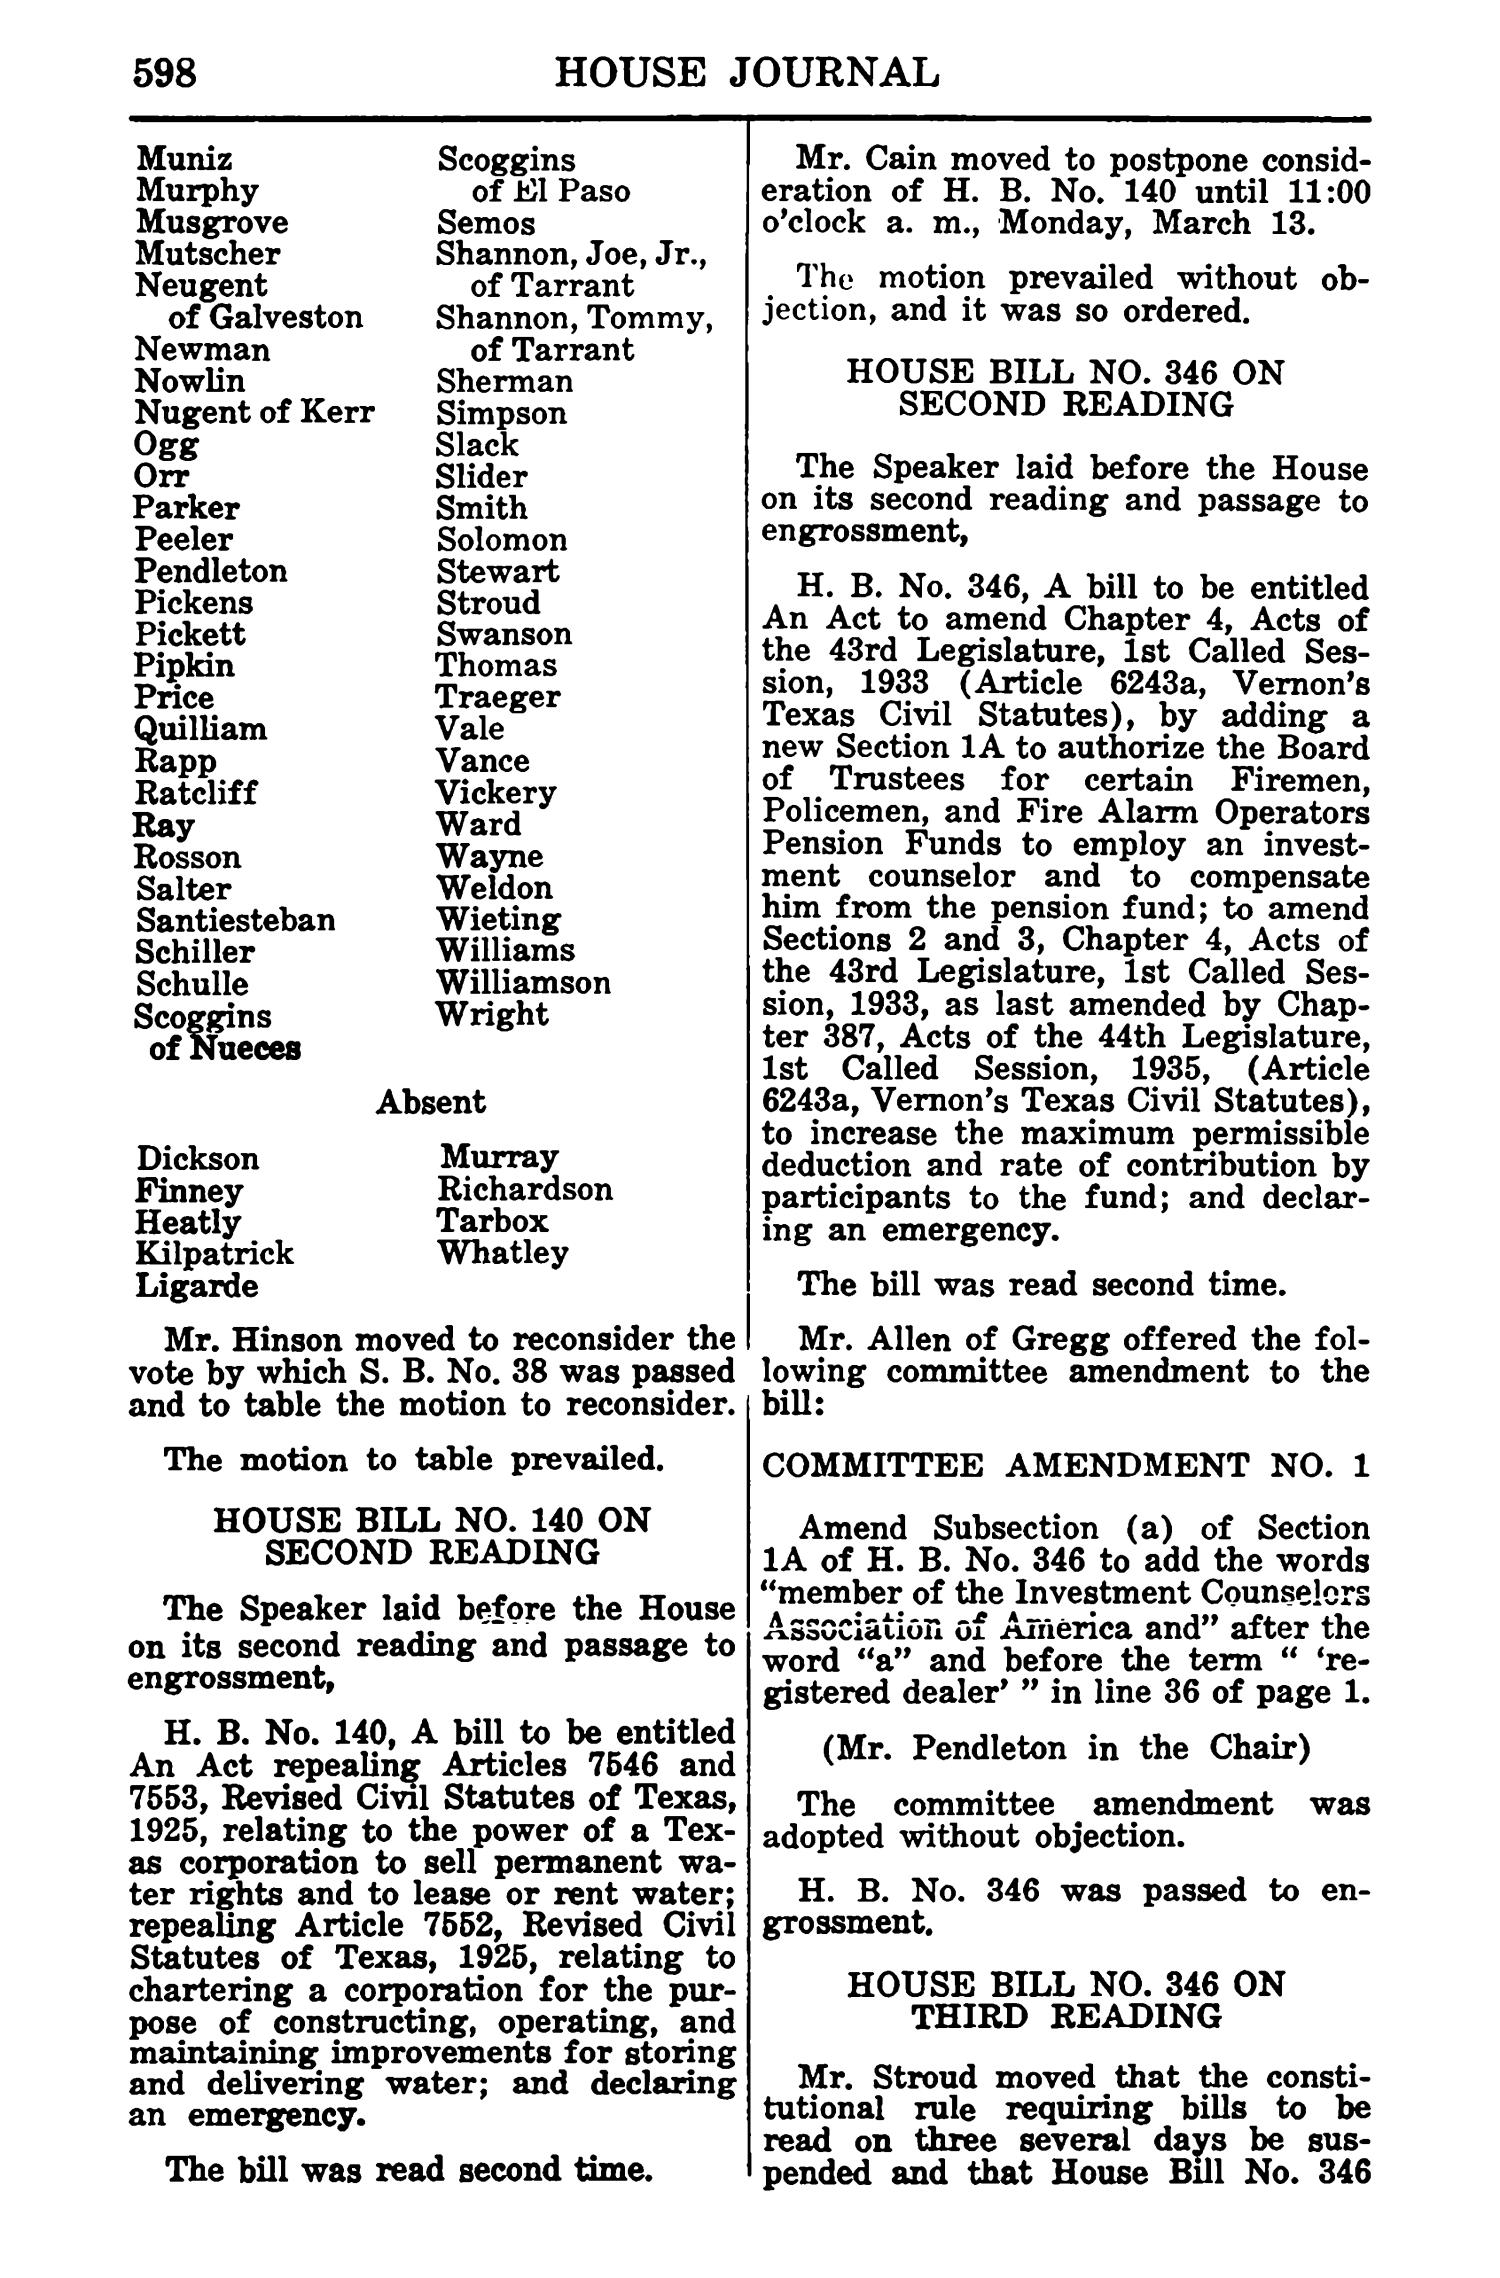 Journal of the House of Representatives of the Regular Session of the Sixtieth Legislature of the State of Texas, Volume 1
                                                
                                                    598
                                                